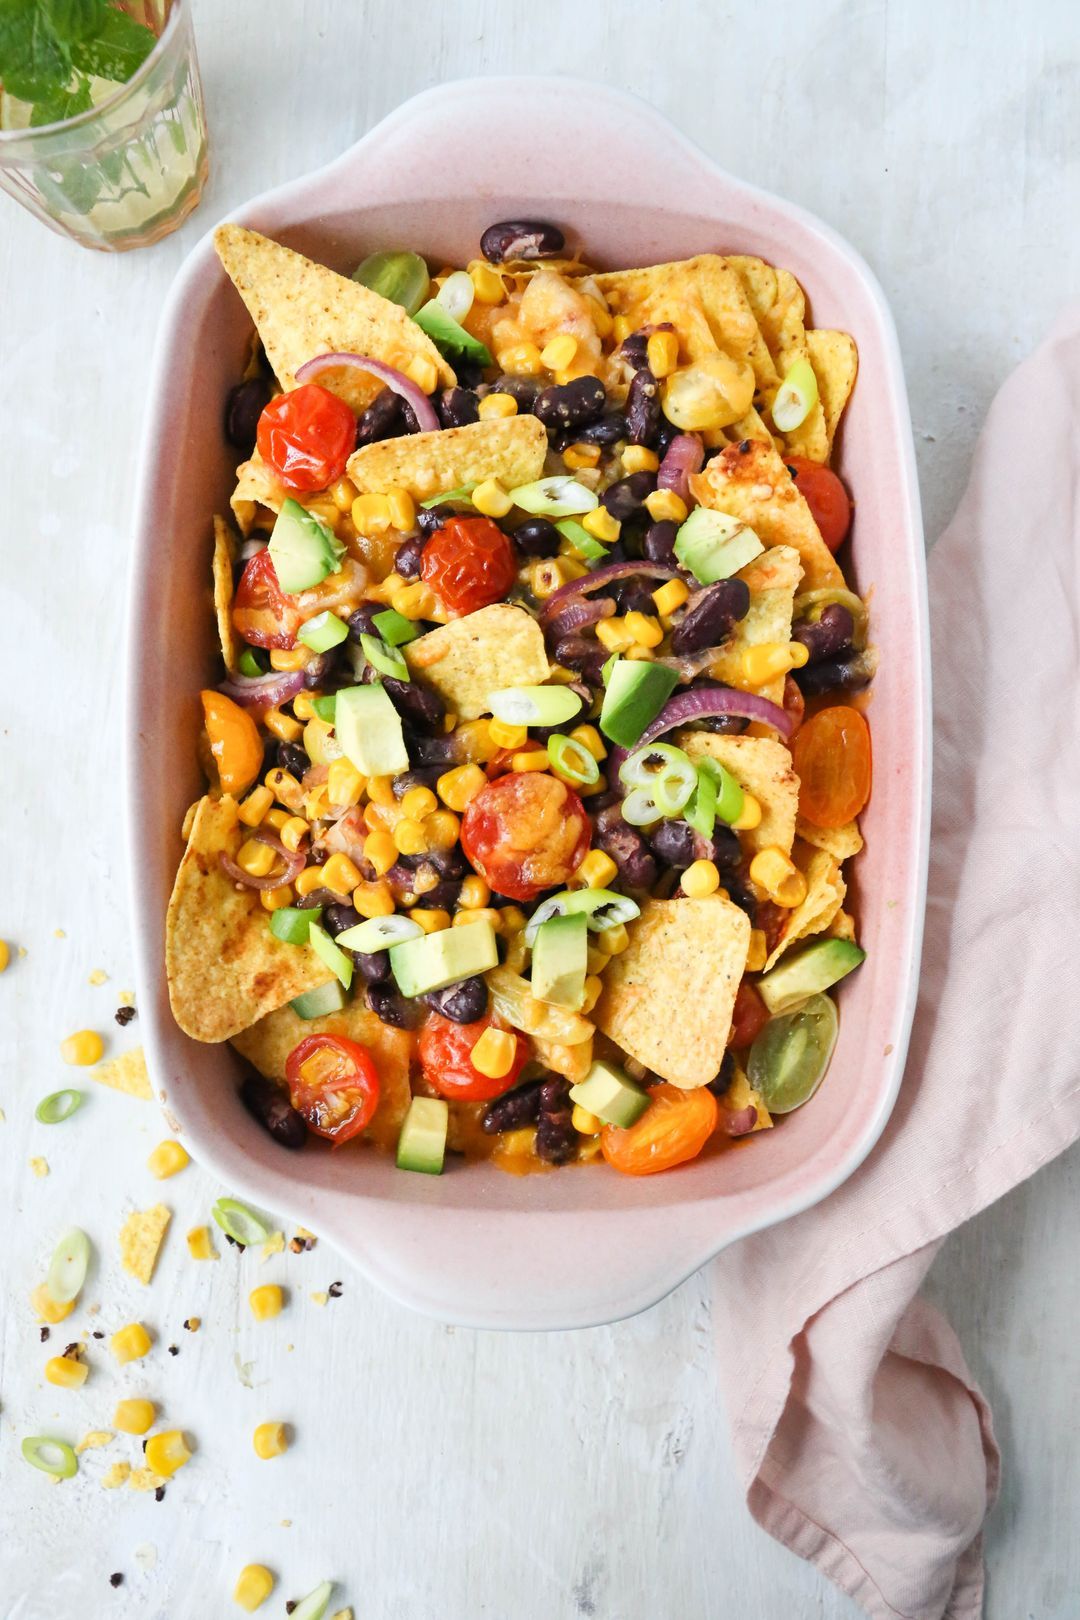 Nacho dish with kidney beans and corn